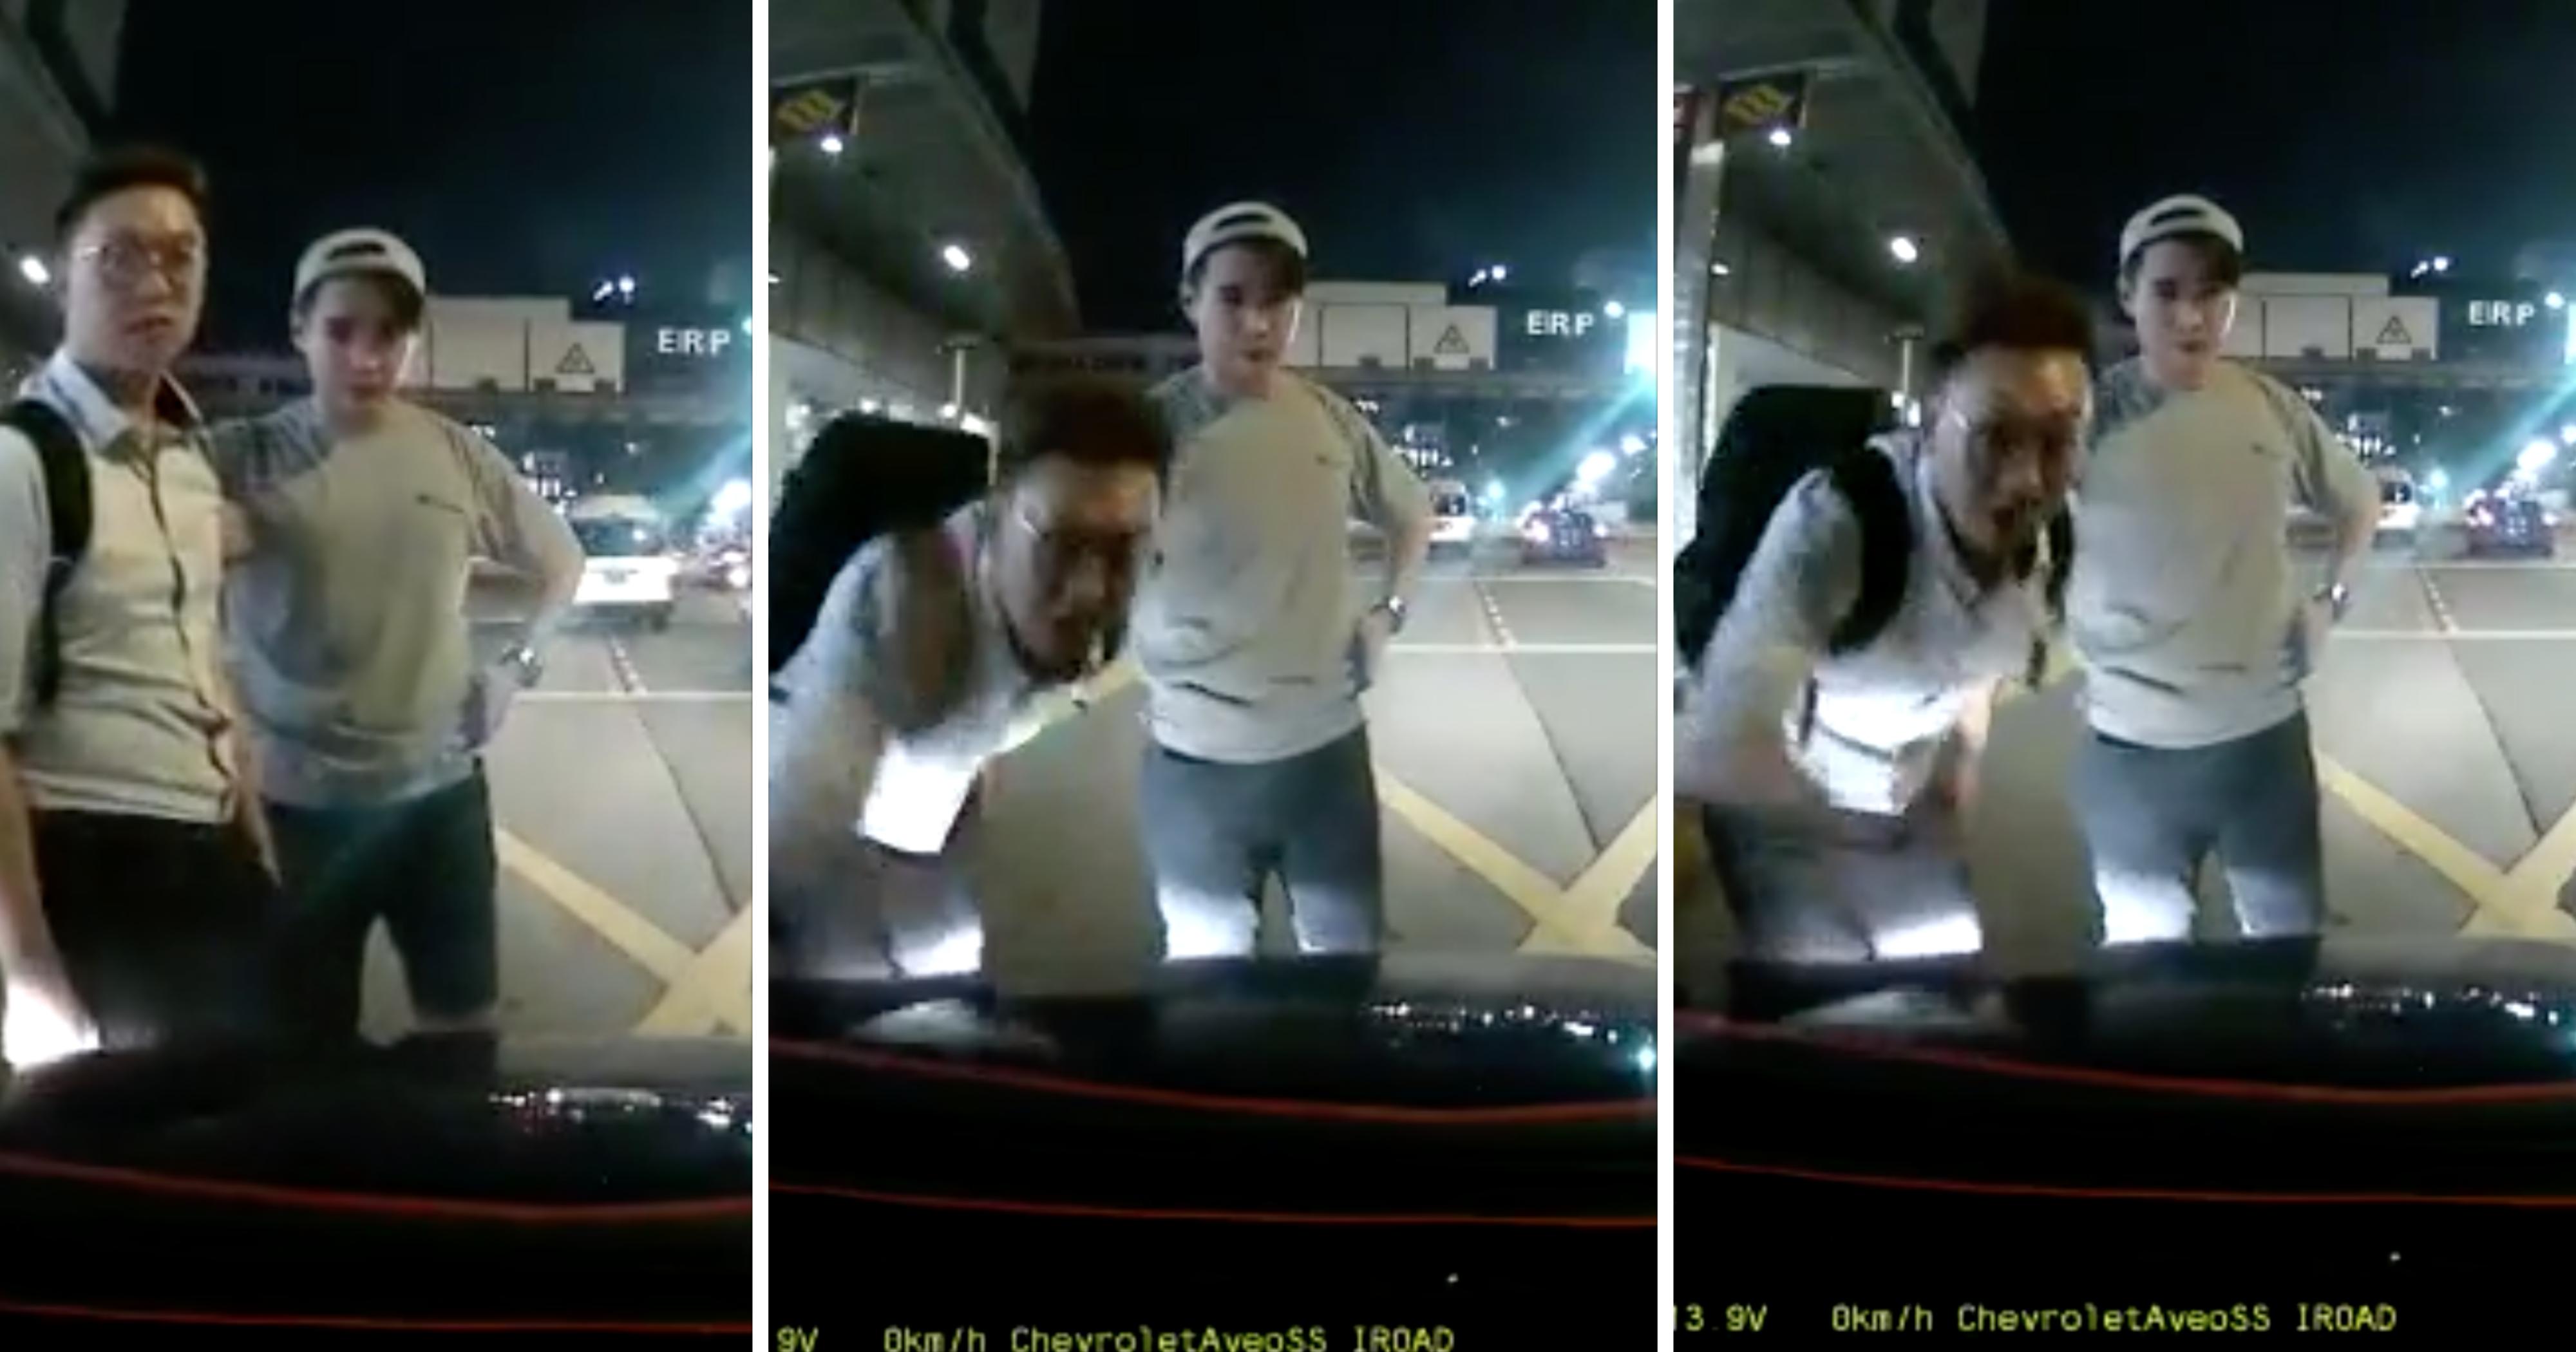 Man Slams Taxi Hood, After Getting Honked At For Standing In Middle Of The Road